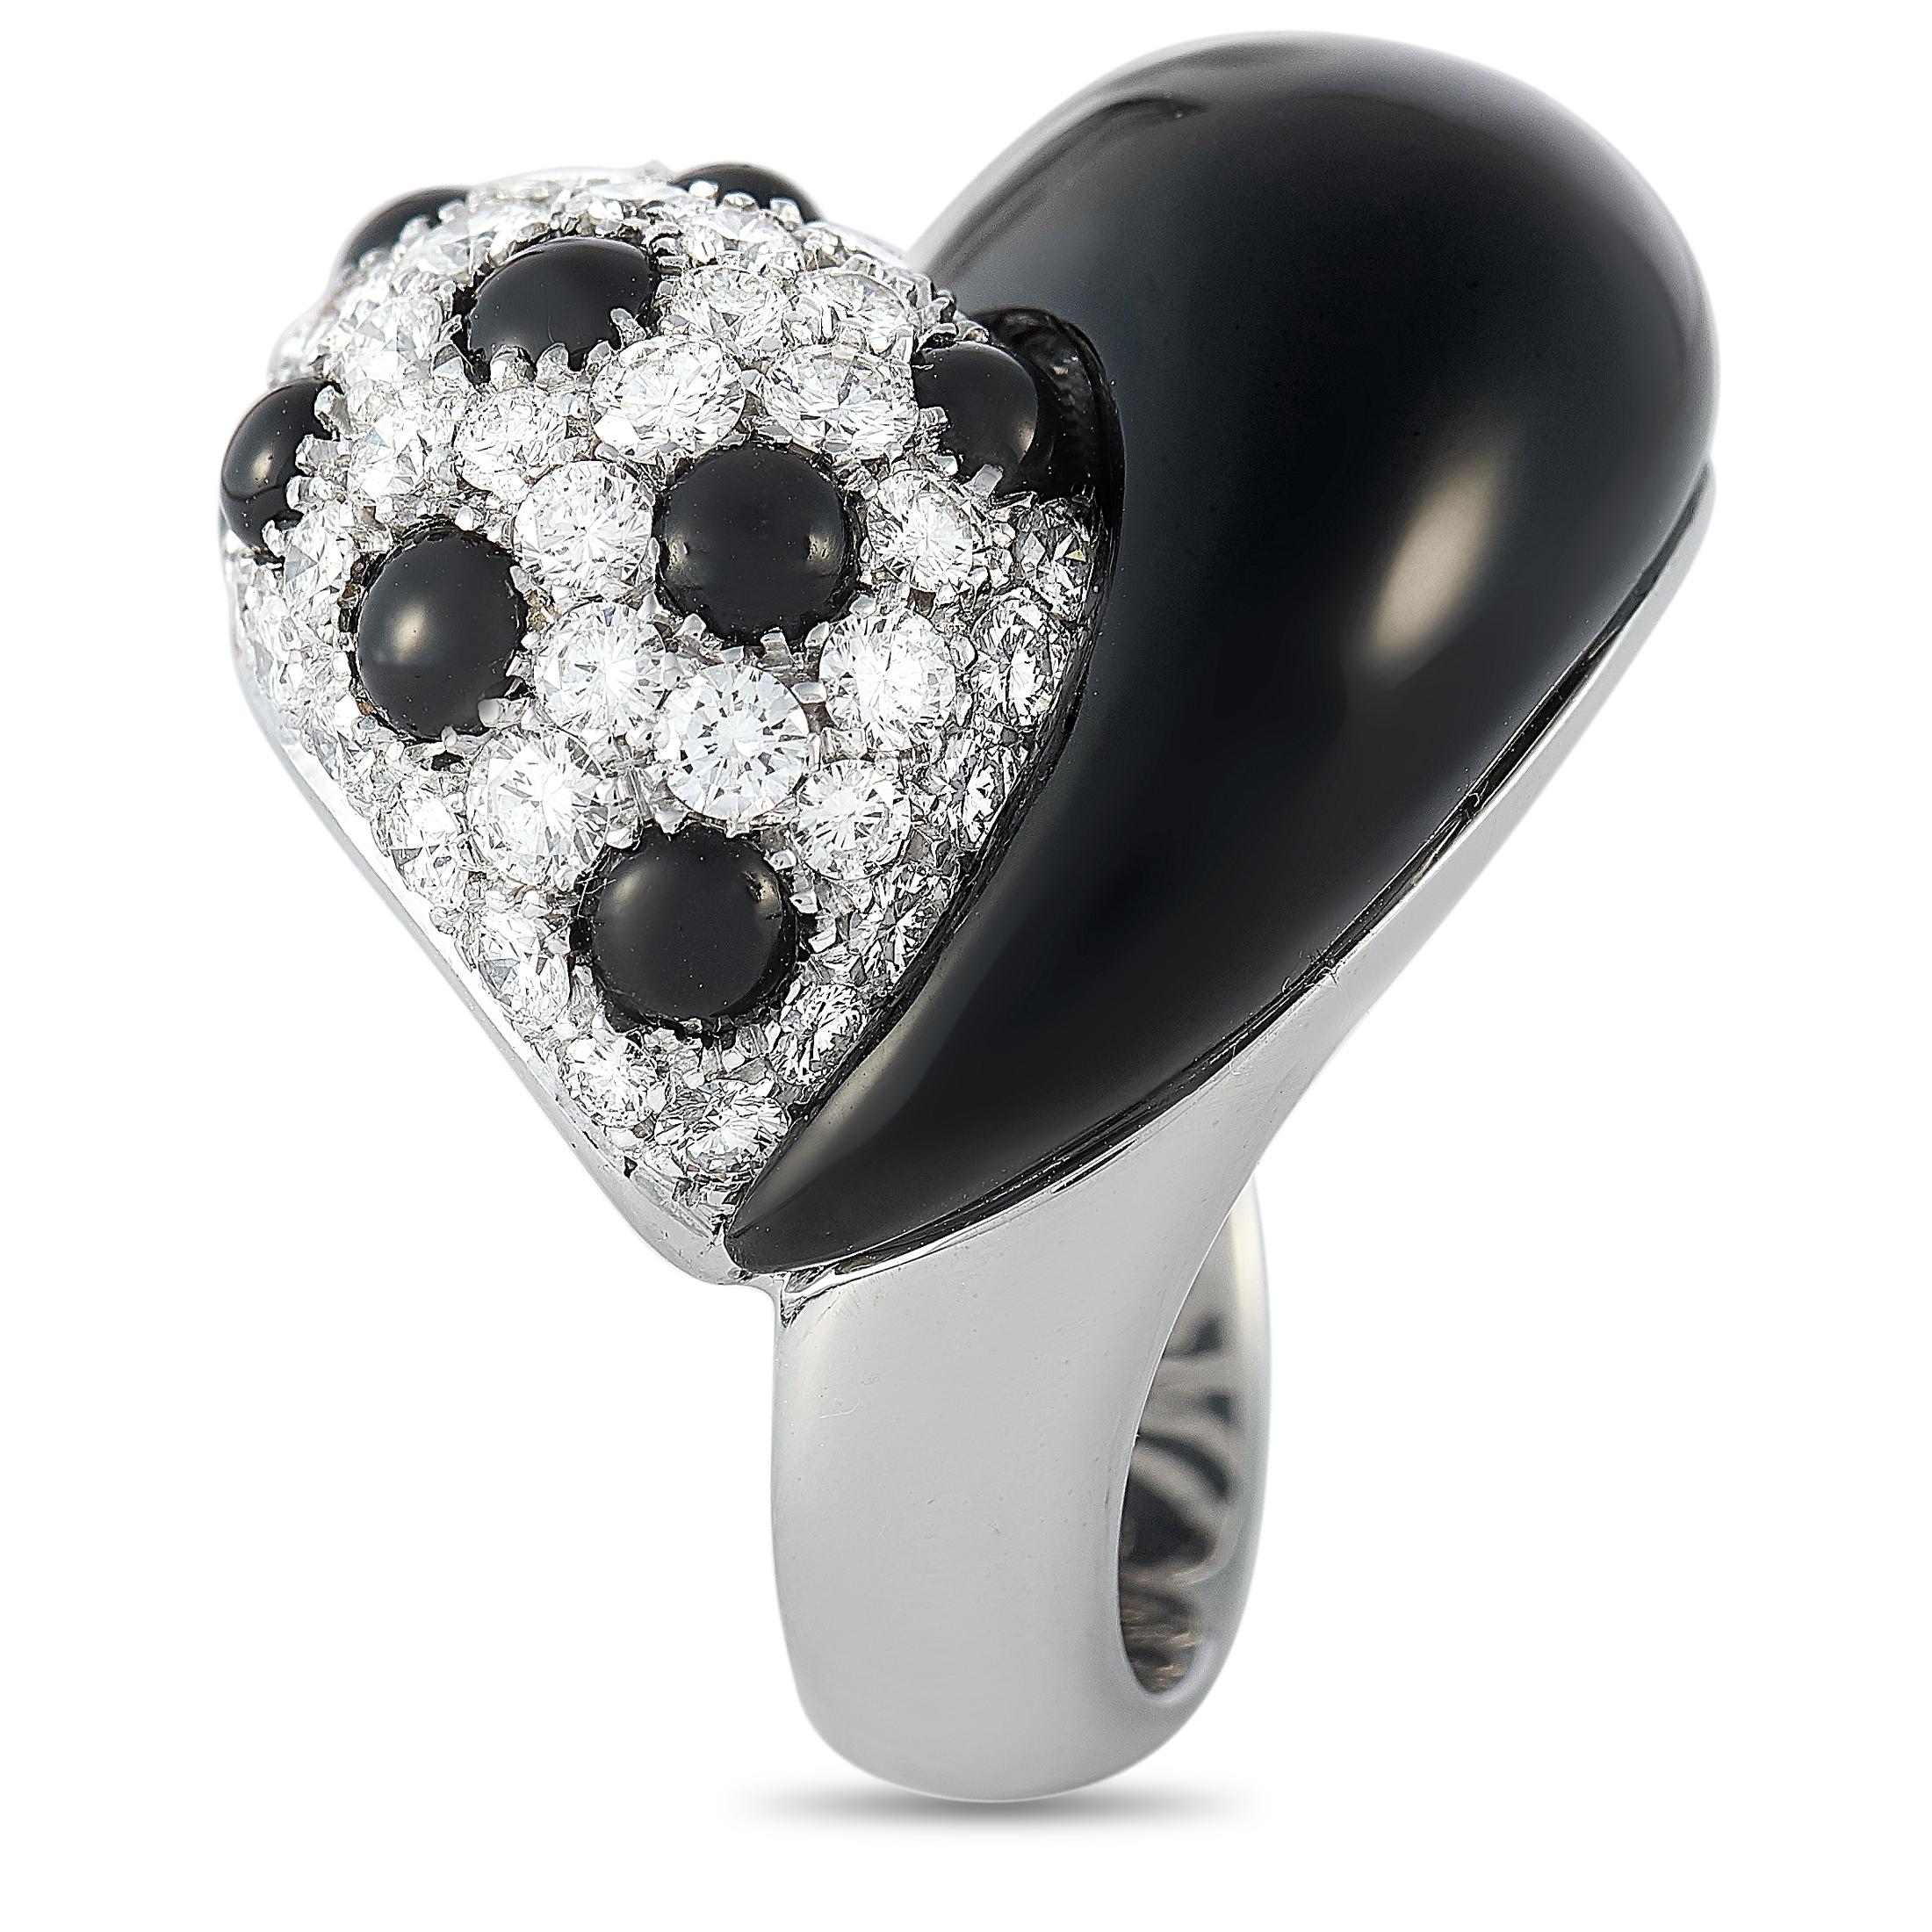 This Picchiotti cocktail ring is made of 18K white gold and embellished with onyx stones and a total of 2.18 carats of diamonds. The ring weighs 15.3 grams and boasts band thickness of 4 mm and top height of 8 mm, while top dimensions measure 22 by